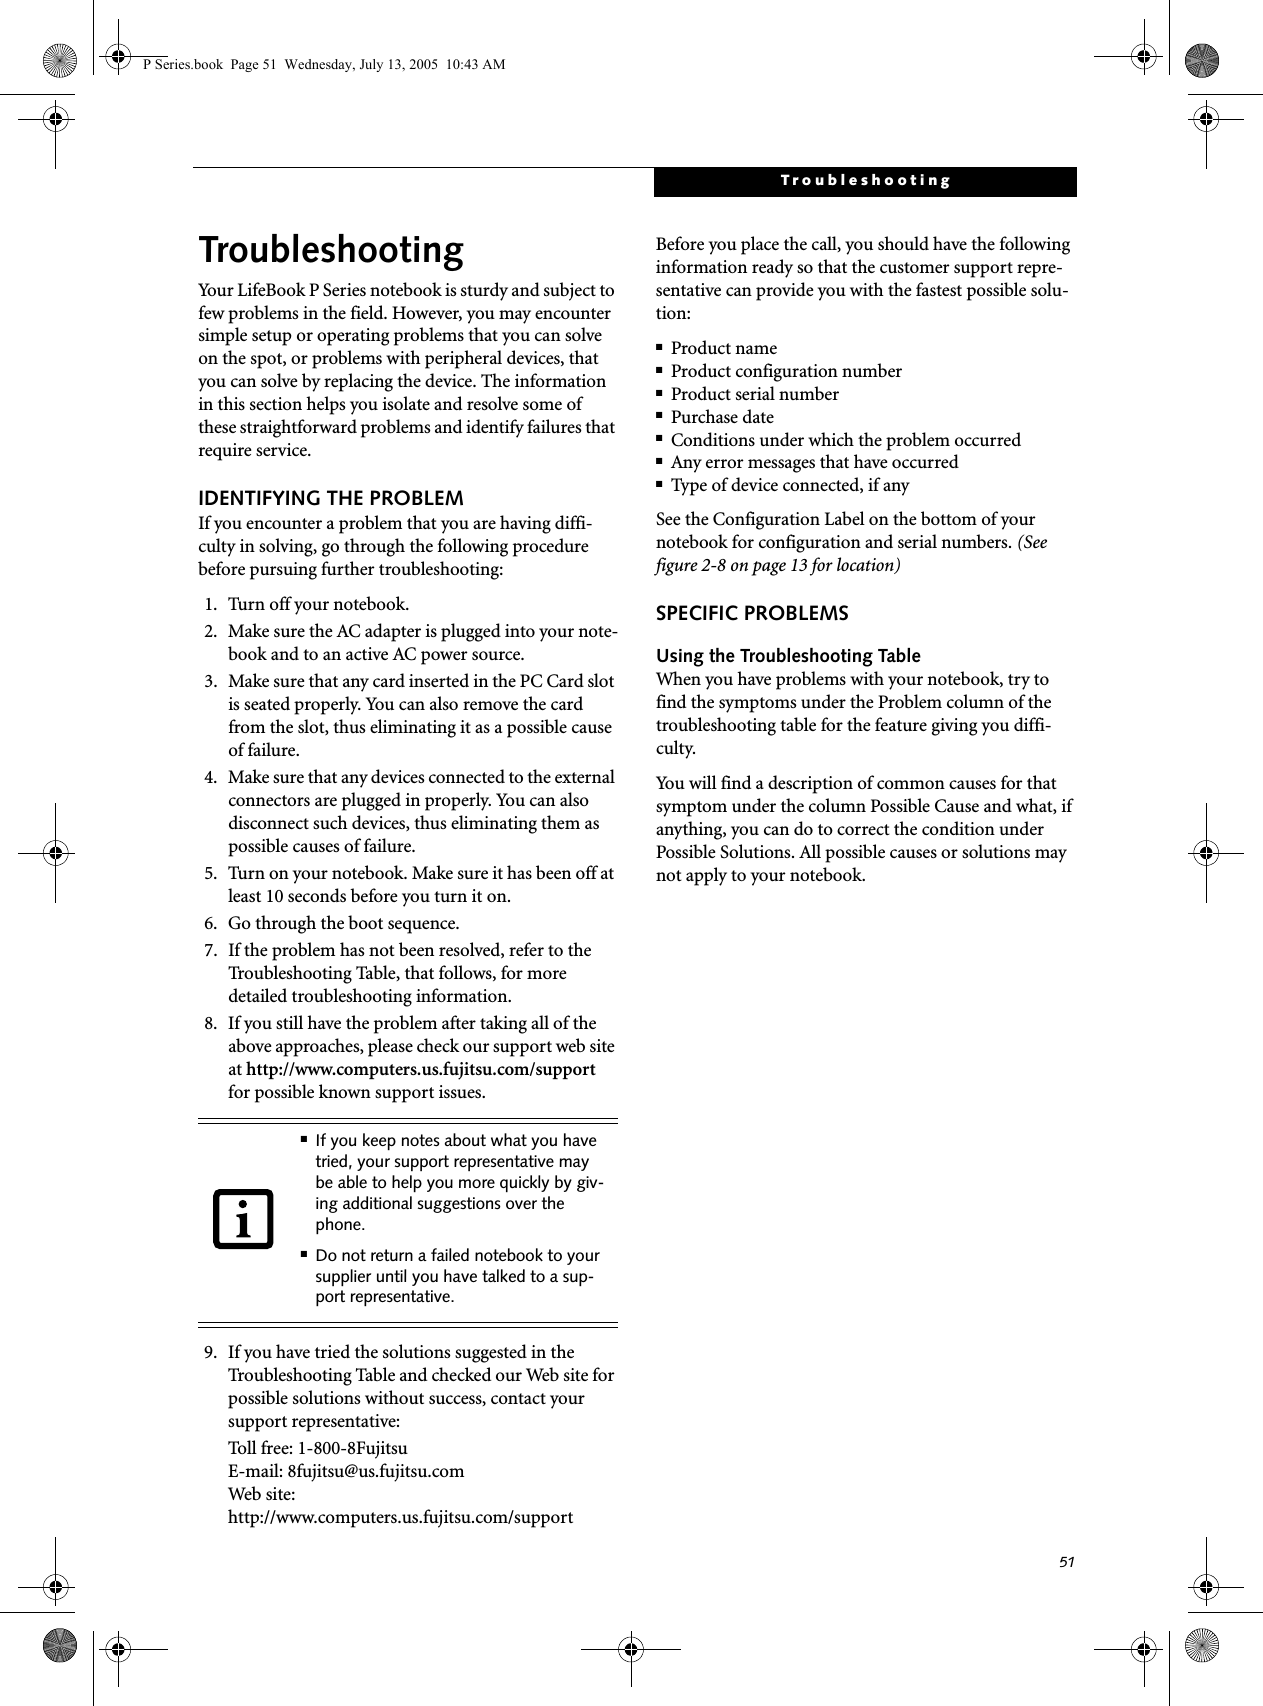 51TroubleshootingTroubleshootingYour LifeBook P Series notebook is sturdy and subject to few problems in the field. However, you may encounter simple setup or operating problems that you can solve on the spot, or problems with peripheral devices, that you can solve by replacing the device. The information in this section helps you isolate and resolve some of these straightforward problems and identify failures that require service.IDENTIFYING THE PROBLEMIf you encounter a problem that you are having diffi-culty in solving, go through the following procedure before pursuing further troubleshooting:1. Turn off your notebook.2. Make sure the AC adapter is plugged into your note-book and to an active AC power source.3. Make sure that any card inserted in the PC Card slot is seated properly. You can also remove the card from the slot, thus eliminating it as a possible cause of failure.4. Make sure that any devices connected to the external connectors are plugged in properly. You can also disconnect such devices, thus eliminating them as possible causes of failure.5. Turn on your notebook. Make sure it has been off at least 10 seconds before you turn it on.6. Go through the boot sequence.7. If the problem has not been resolved, refer to the Troubleshooting Table, that follows, for more detailed troubleshooting information.8. If you still have the problem after taking all of the above approaches, please check our support web site at http://www.computers.us.fujitsu.com/support for possible known support issues. 9. If you have tried the solutions suggested in the Troubleshooting Table and checked our Web site for possible solutions without success, contact your support representative: Toll free: 1-800-8Fujitsu E-mail: 8fujitsu@us.fujitsu.comWeb site: http://www.computers.us.fujitsu.com/supportBefore you place the call, you should have the following information ready so that the customer support repre-sentative can provide you with the fastest possible solu-tion:■Product name■Product configuration number■Product serial number■Purchase date■Conditions under which the problem occurred■Any error messages that have occurred■Type of device connected, if anySee the Configuration Label on the bottom of yournotebook for configuration and serial numbers. (See figure 2-8 on page 13 for location)SPECIFIC PROBLEMSUsing the Troubleshooting TableWhen you have problems with your notebook, try to find the symptoms under the Problem column of the troubleshooting table for the feature giving you diffi-culty. You will find a description of common causes for that symptom under the column Possible Cause and what, if anything, you can do to correct the condition under Possible Solutions. All possible causes or solutions may not apply to your notebook.■If you keep notes about what you have tried, your support representative may be able to help you more quickly by giv-ing additional suggestions over the phone.■Do not return a failed notebook to your supplier until you have talked to a sup-port representative.P Series.book  Page 51  Wednesday, July 13, 2005  10:43 AM